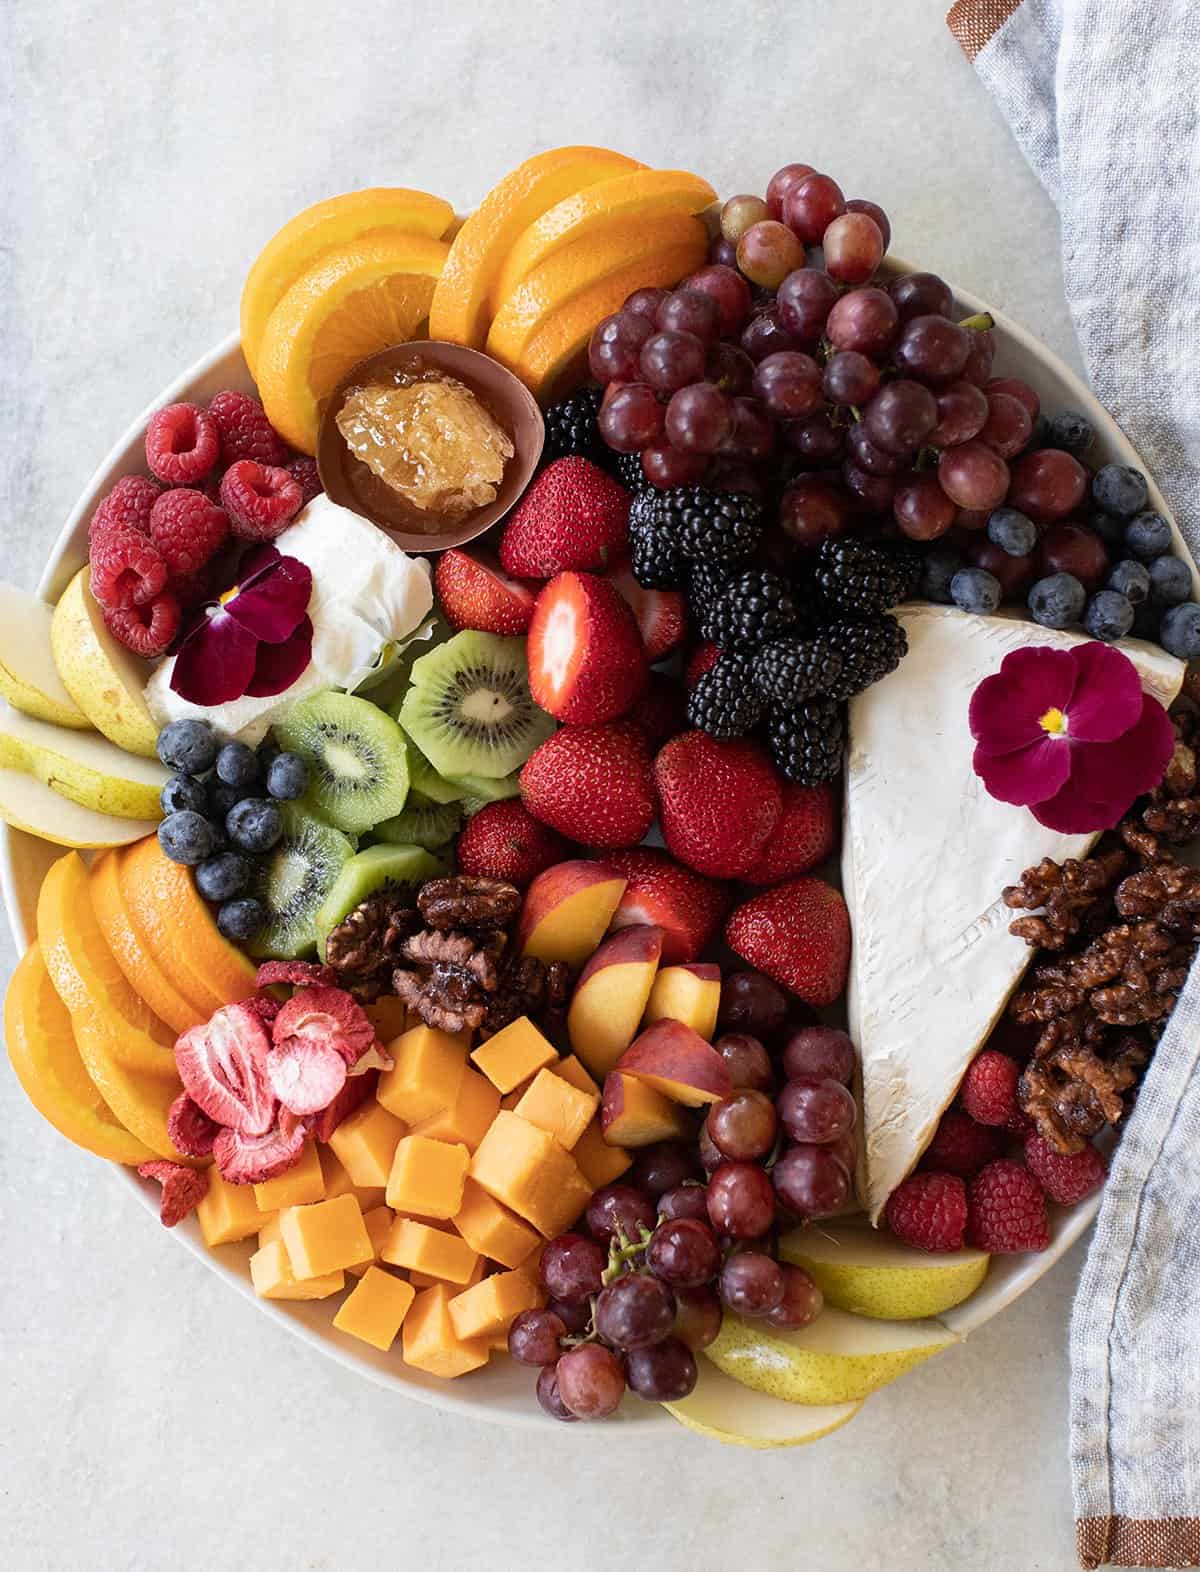 Fruit and cheese platter.